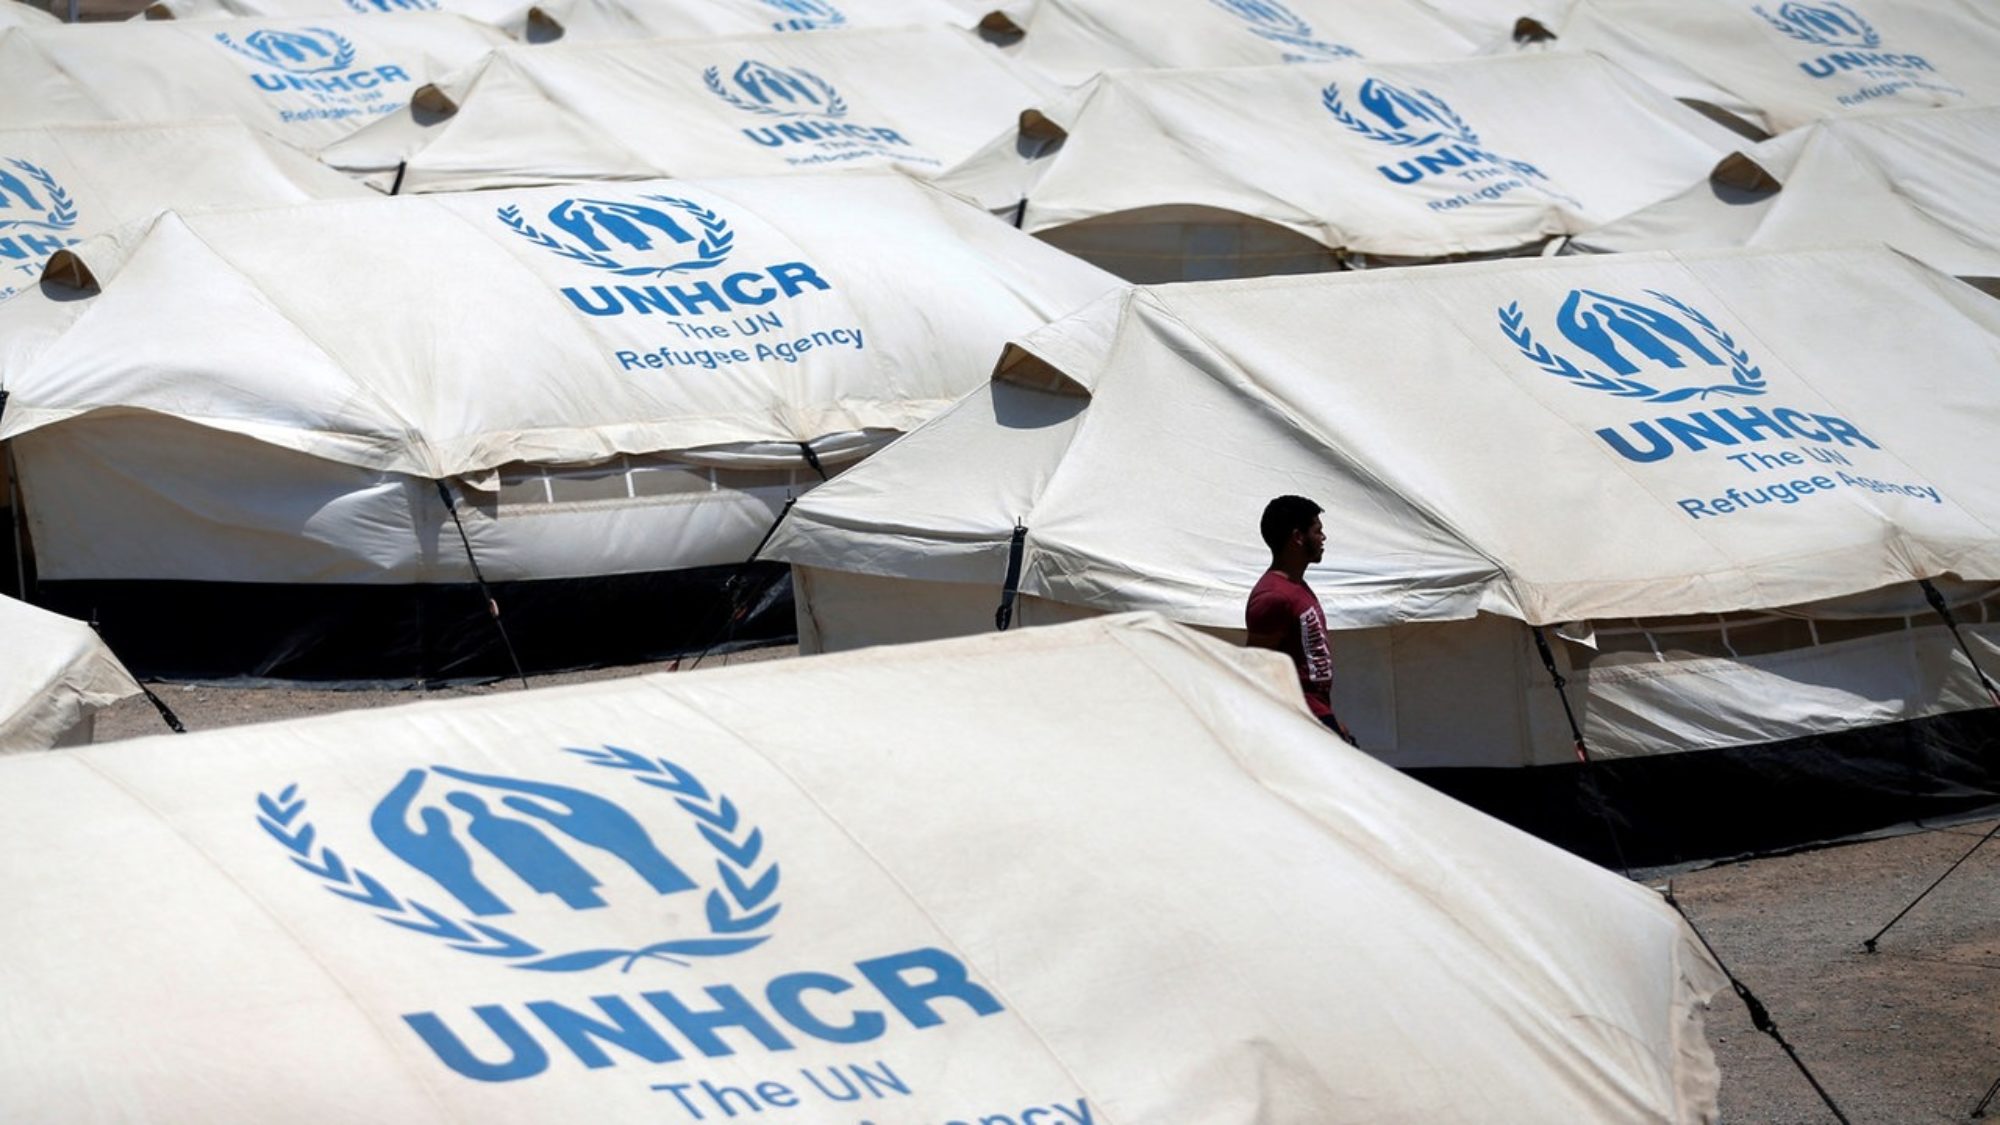 A man walks alone through a cluster of white tents with the UNHCR logo on them